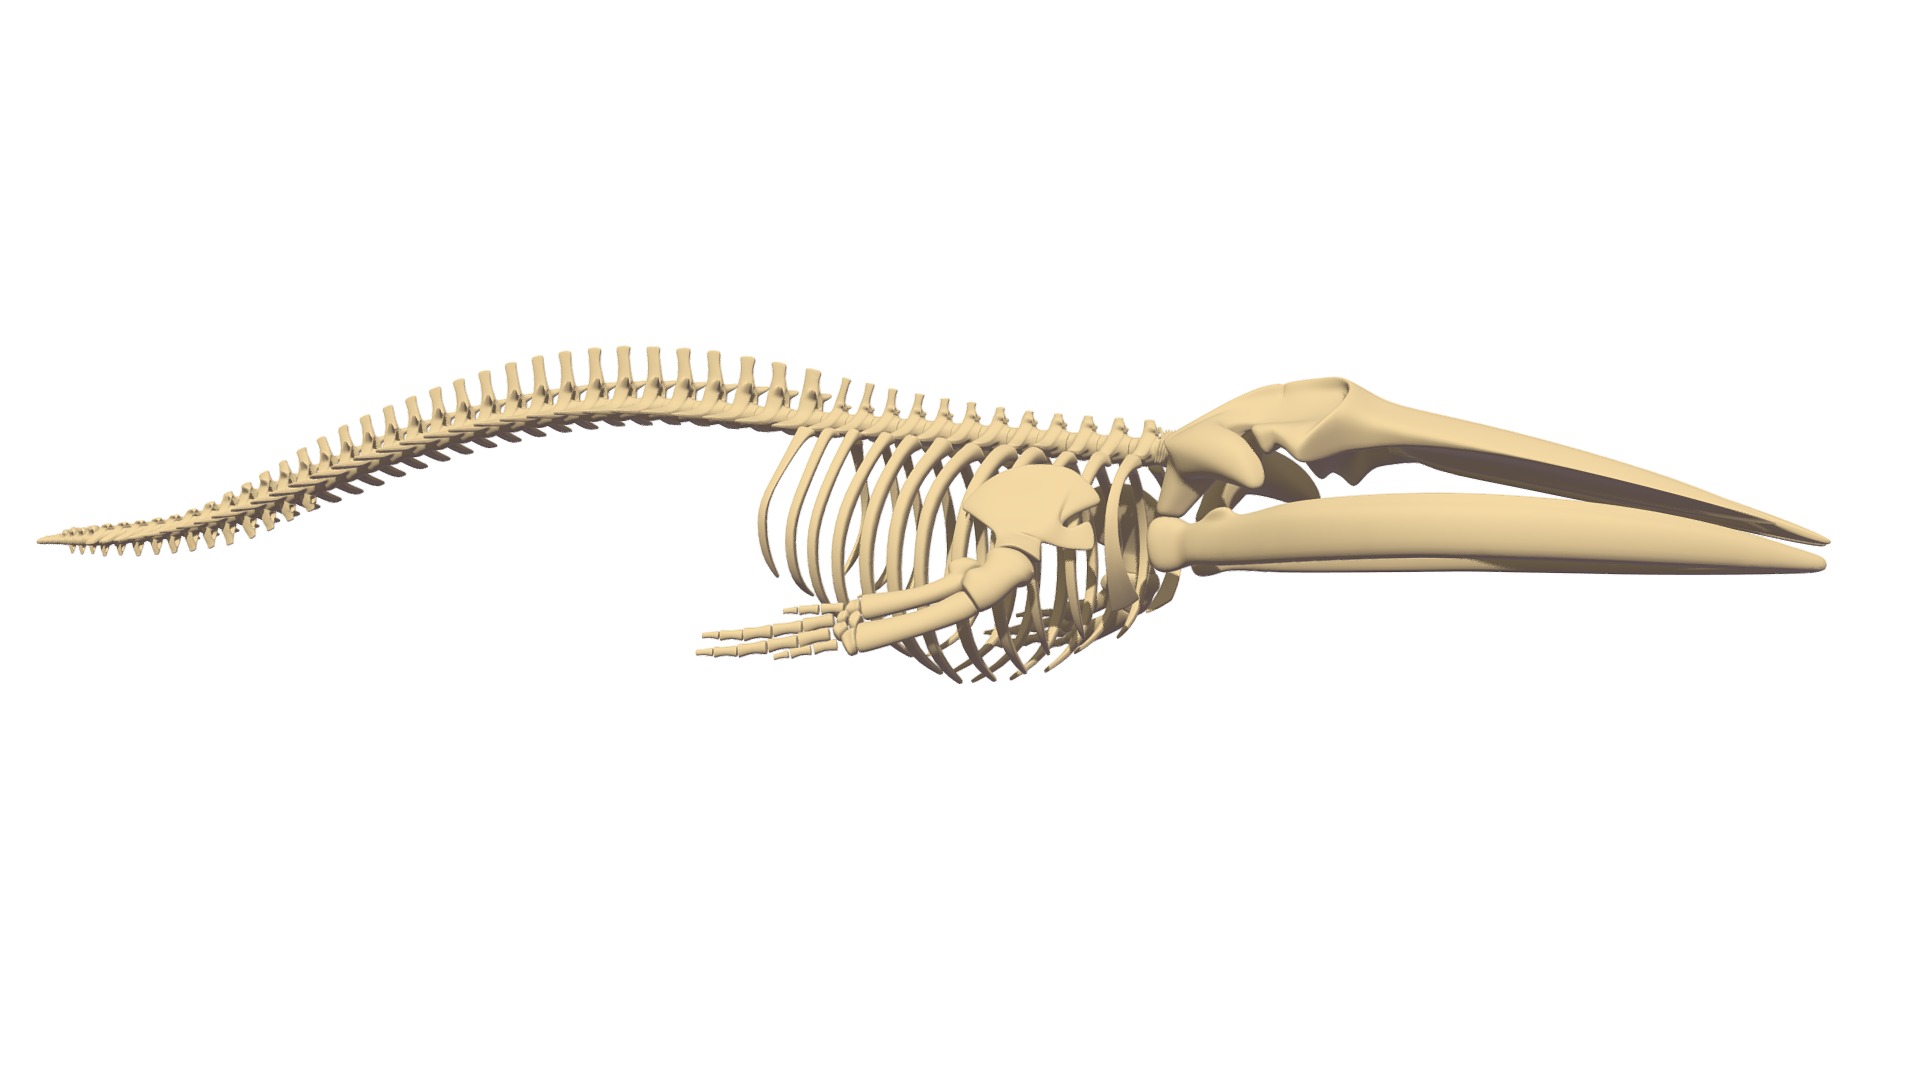 3D model Fin Whale Skeleton - This is a 3D model of the Fin Whale Skeleton. The 3D model is about a gold and silver bracelet.